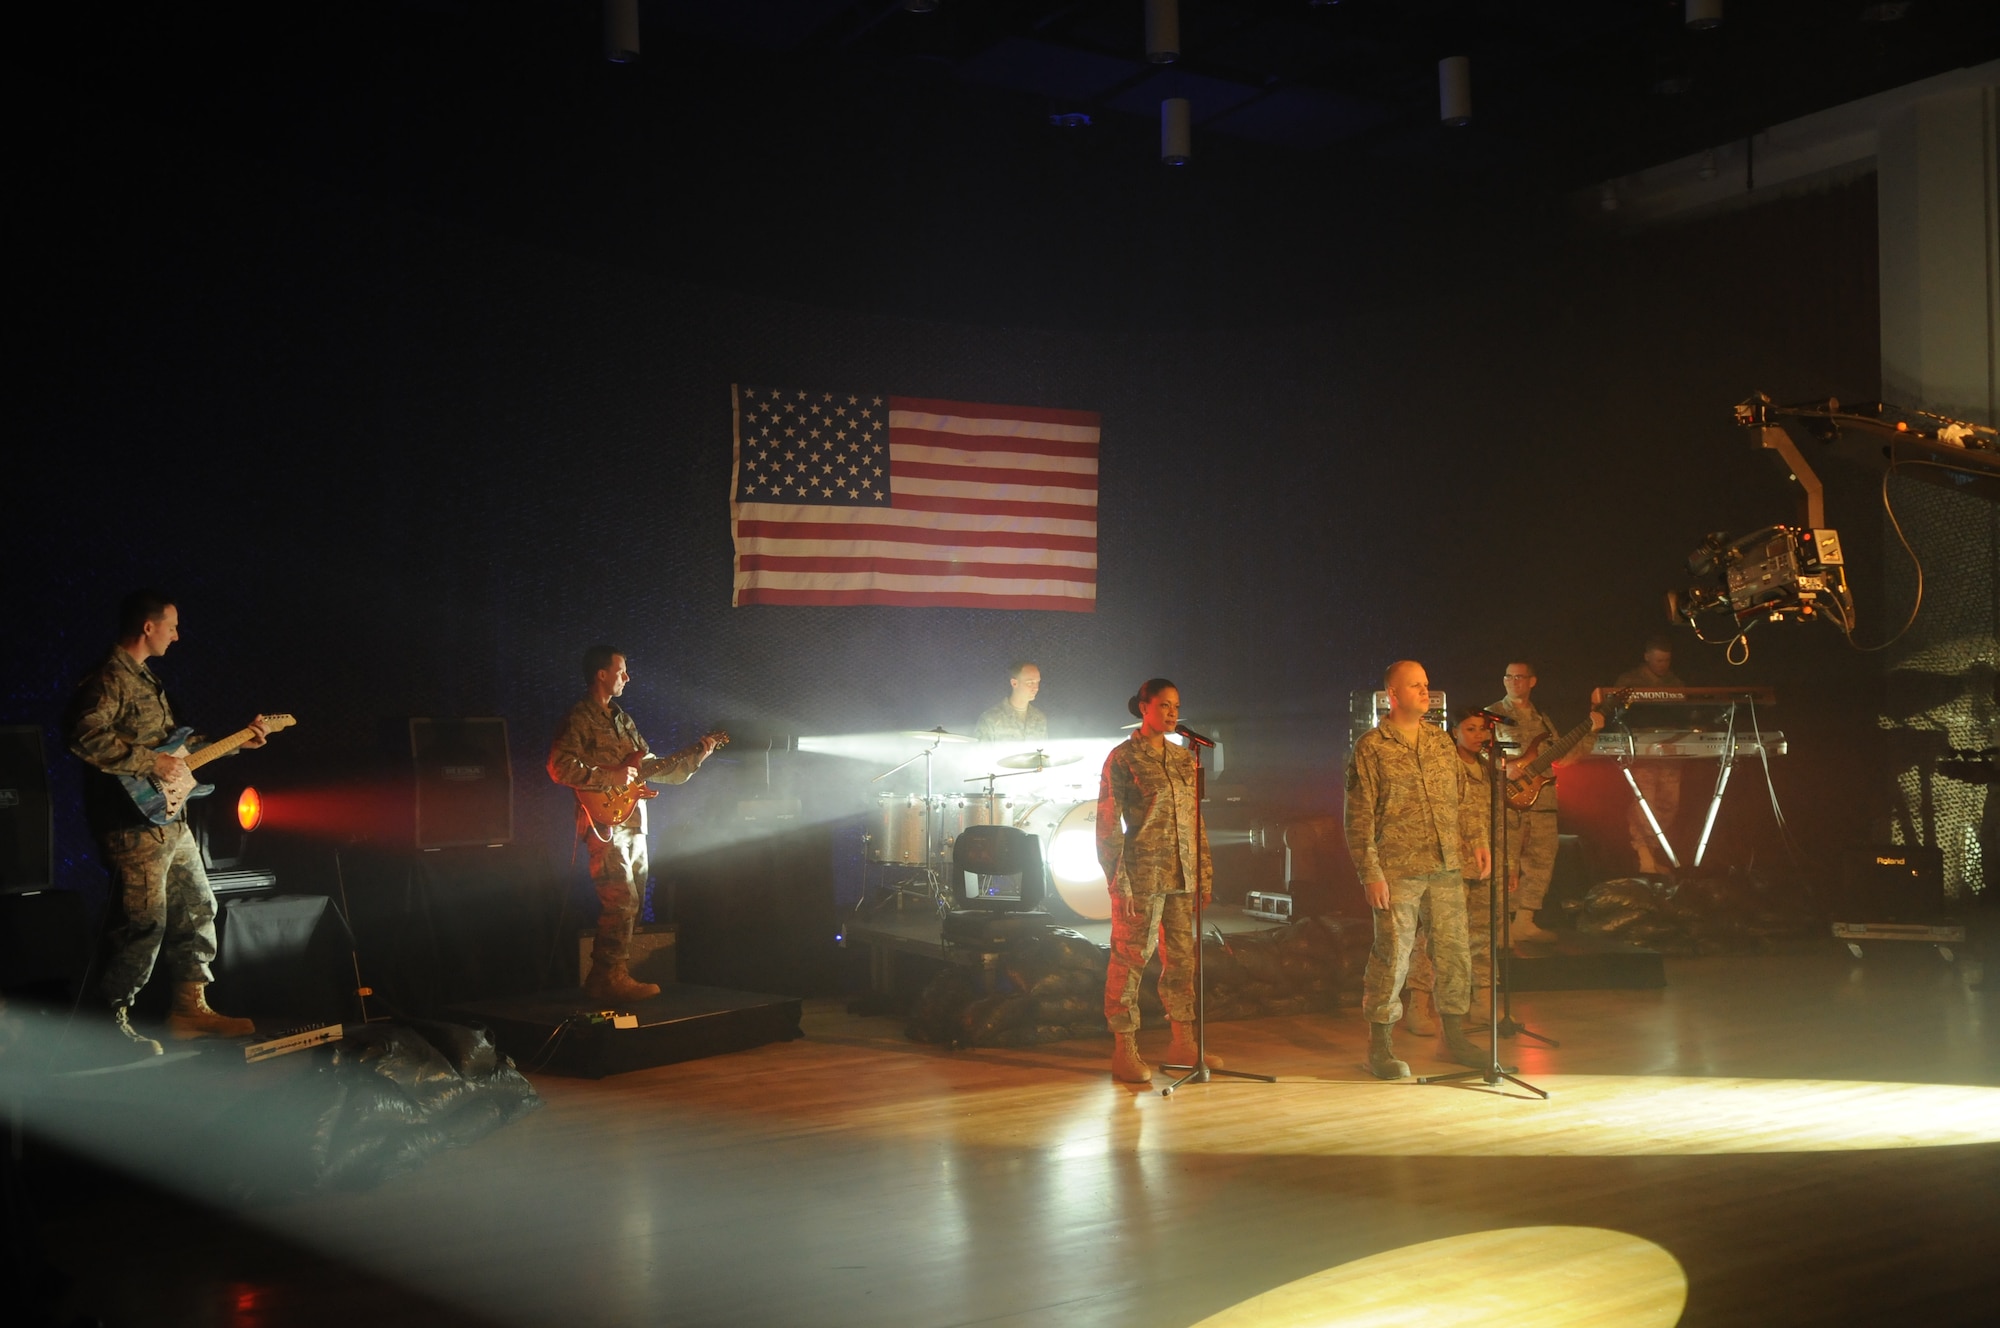 Max Impact, the United States Air Force Band’s rock group, records a video for their latest musical creation, “Locked and Loaded,” Feb. 24 at Hangar 2 on Bolling. The music video is part of Max Impact’s call “to motivate and inspire the newest generation of professional Airmen.” For more information, log on to www.usafband.af.mil. (U.S. Air Force photo by Staff Sgt. Christopher Mills)